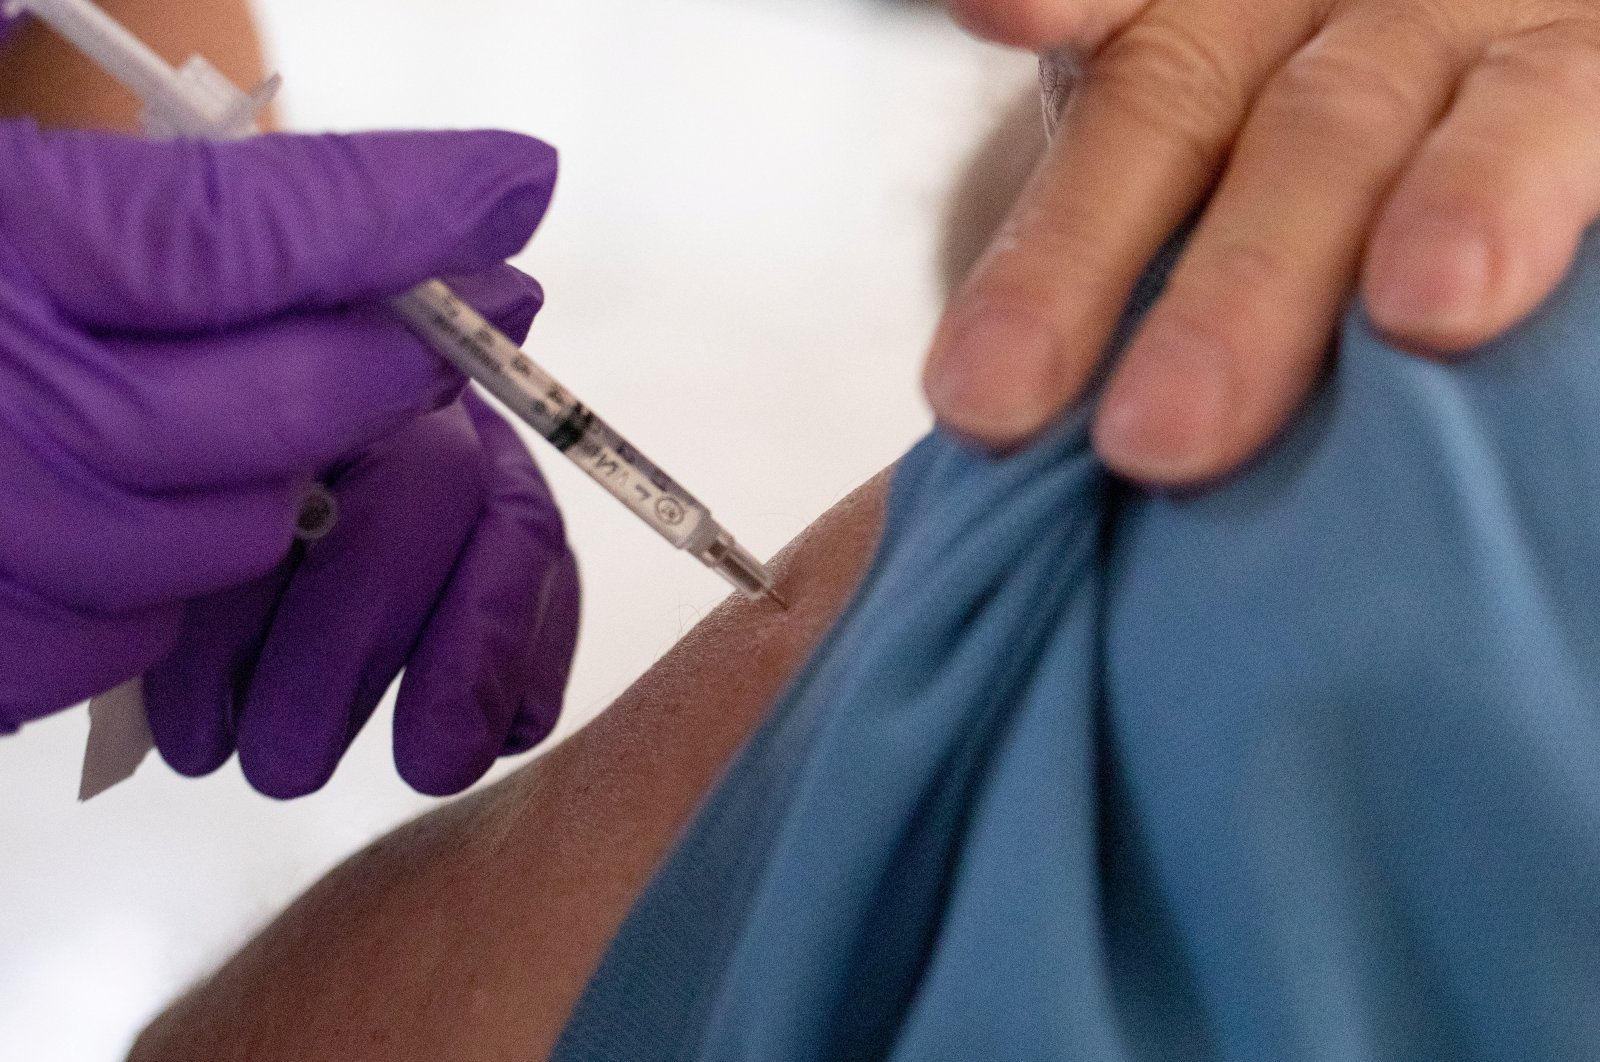 A 50 years old and immunocompromised resident receives a second booster shot of the coronavirus vaccine in Waterford, Michigan, U.S., April 8, 2022. (Reuters Photo)